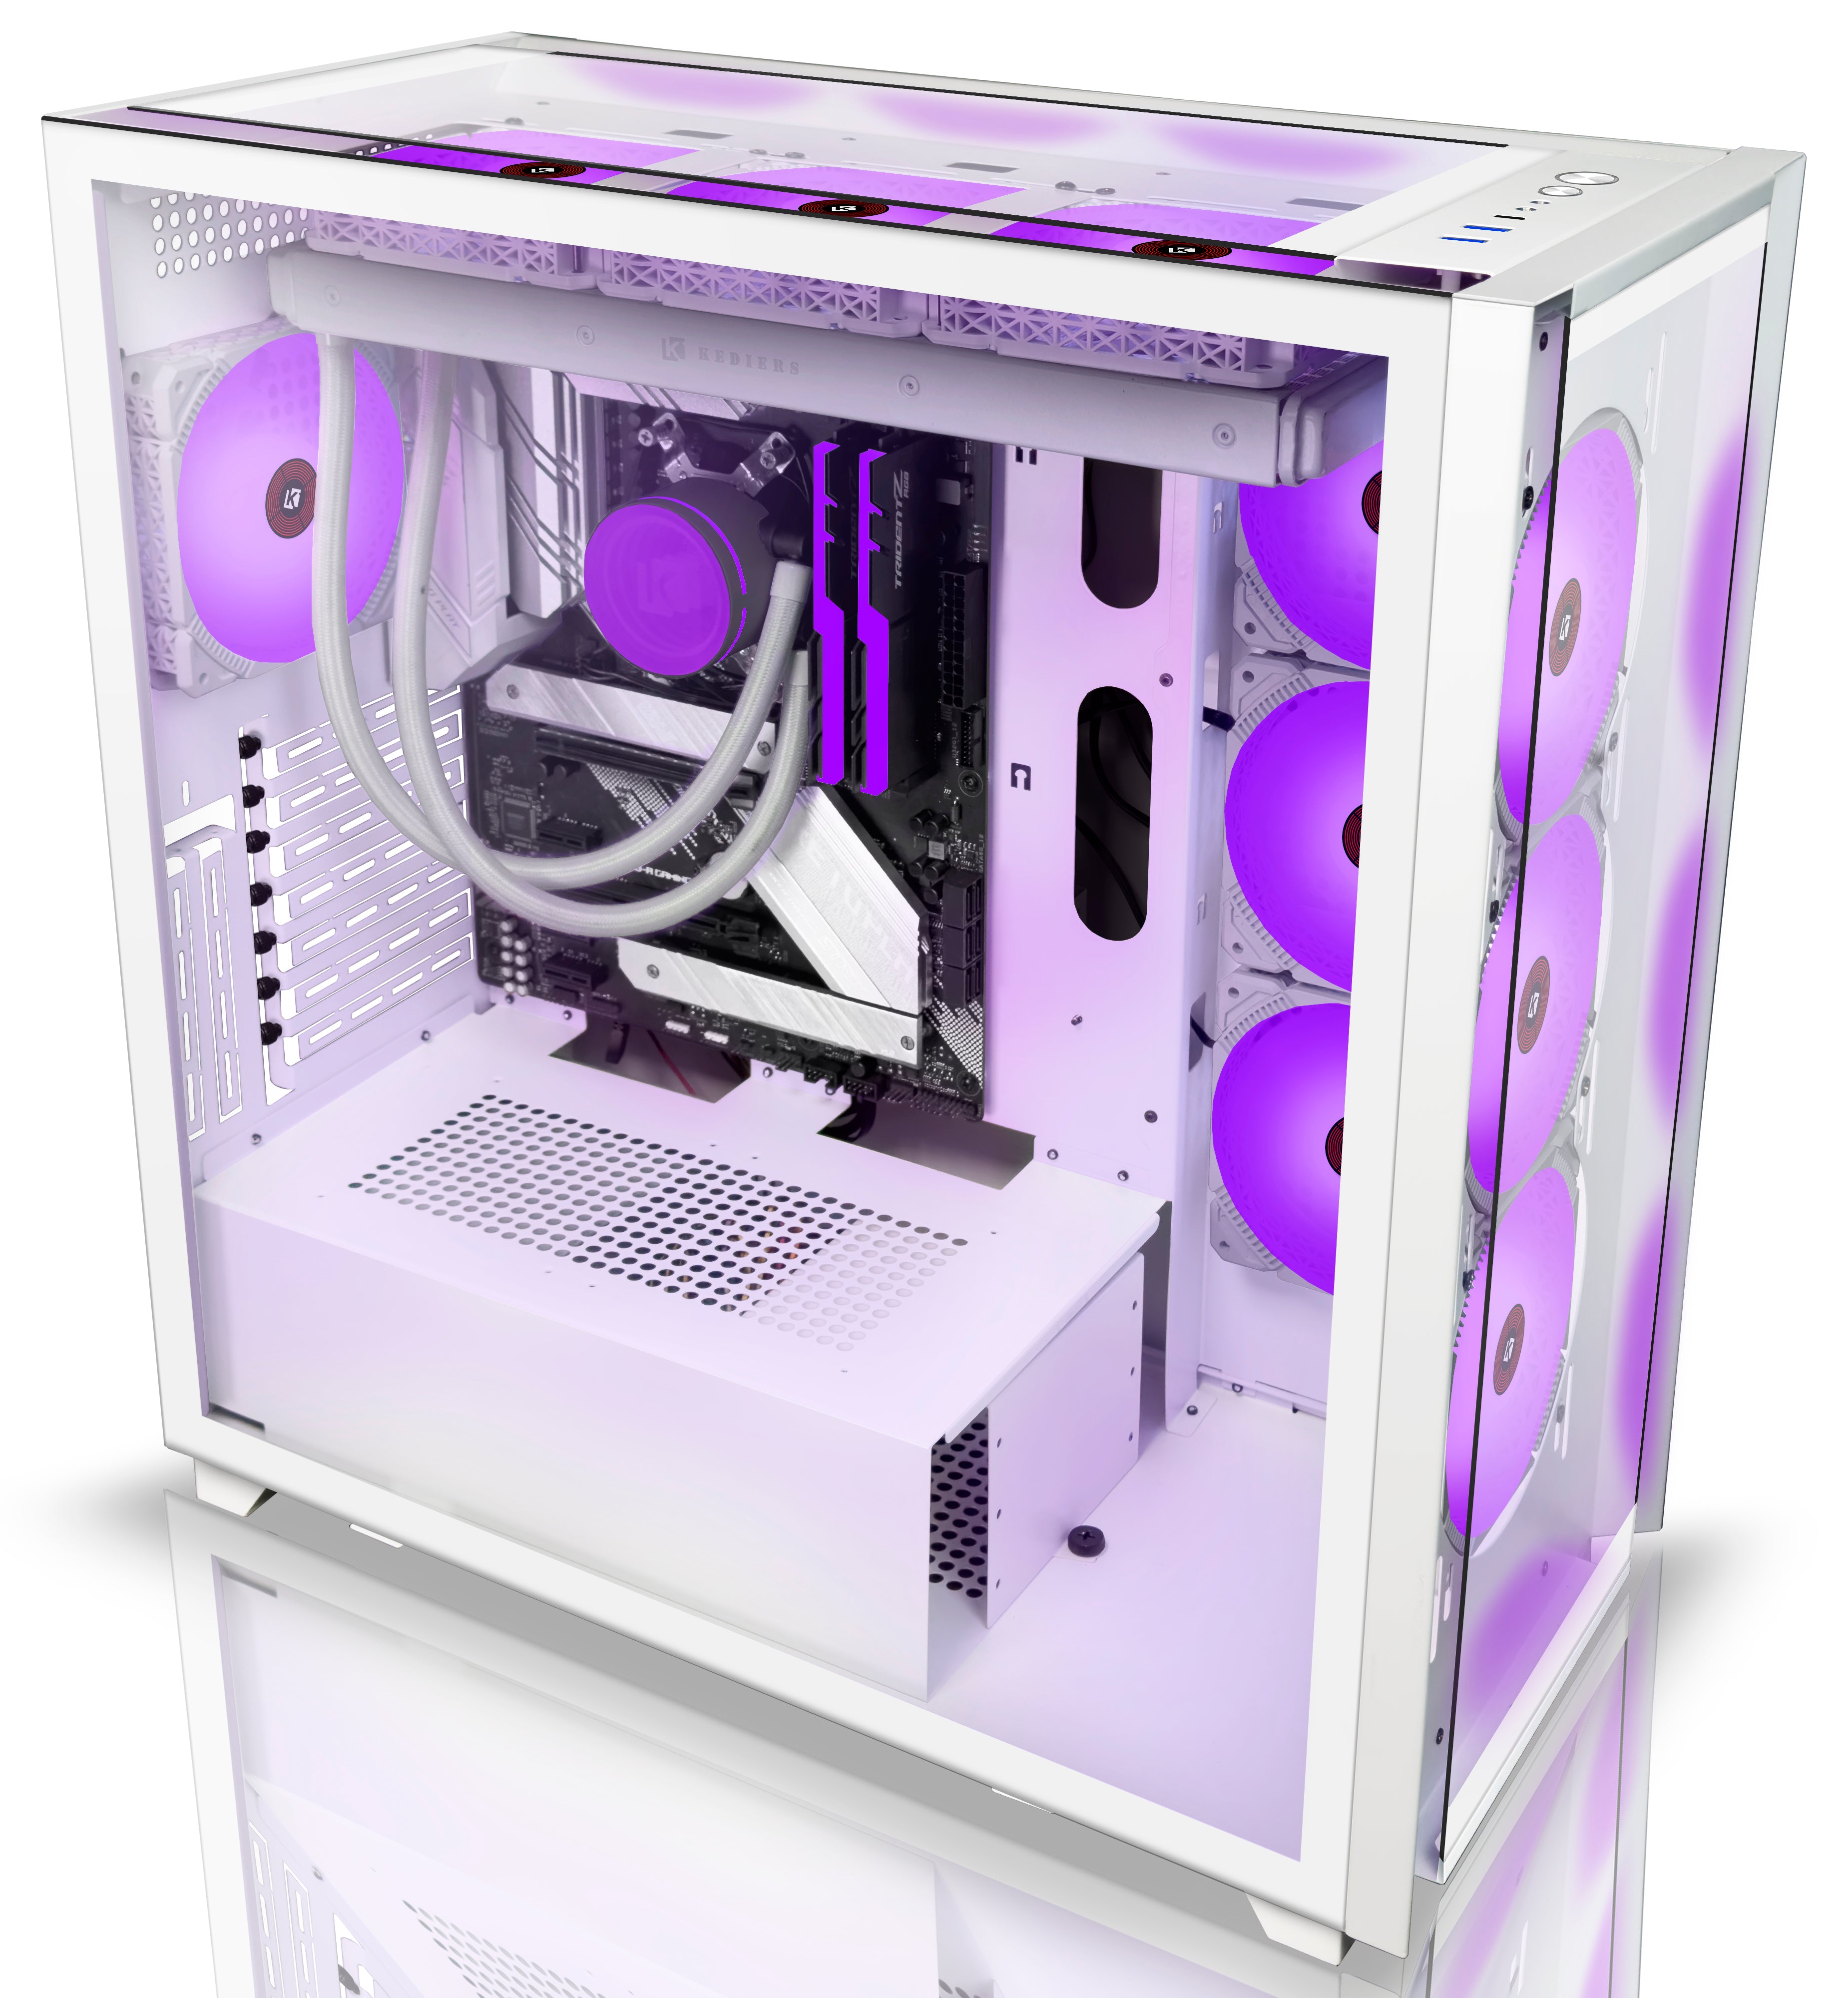 KEDIERS PC Case 7 PWM Cases Fans,ARGB Mid Tower ATX Gaming